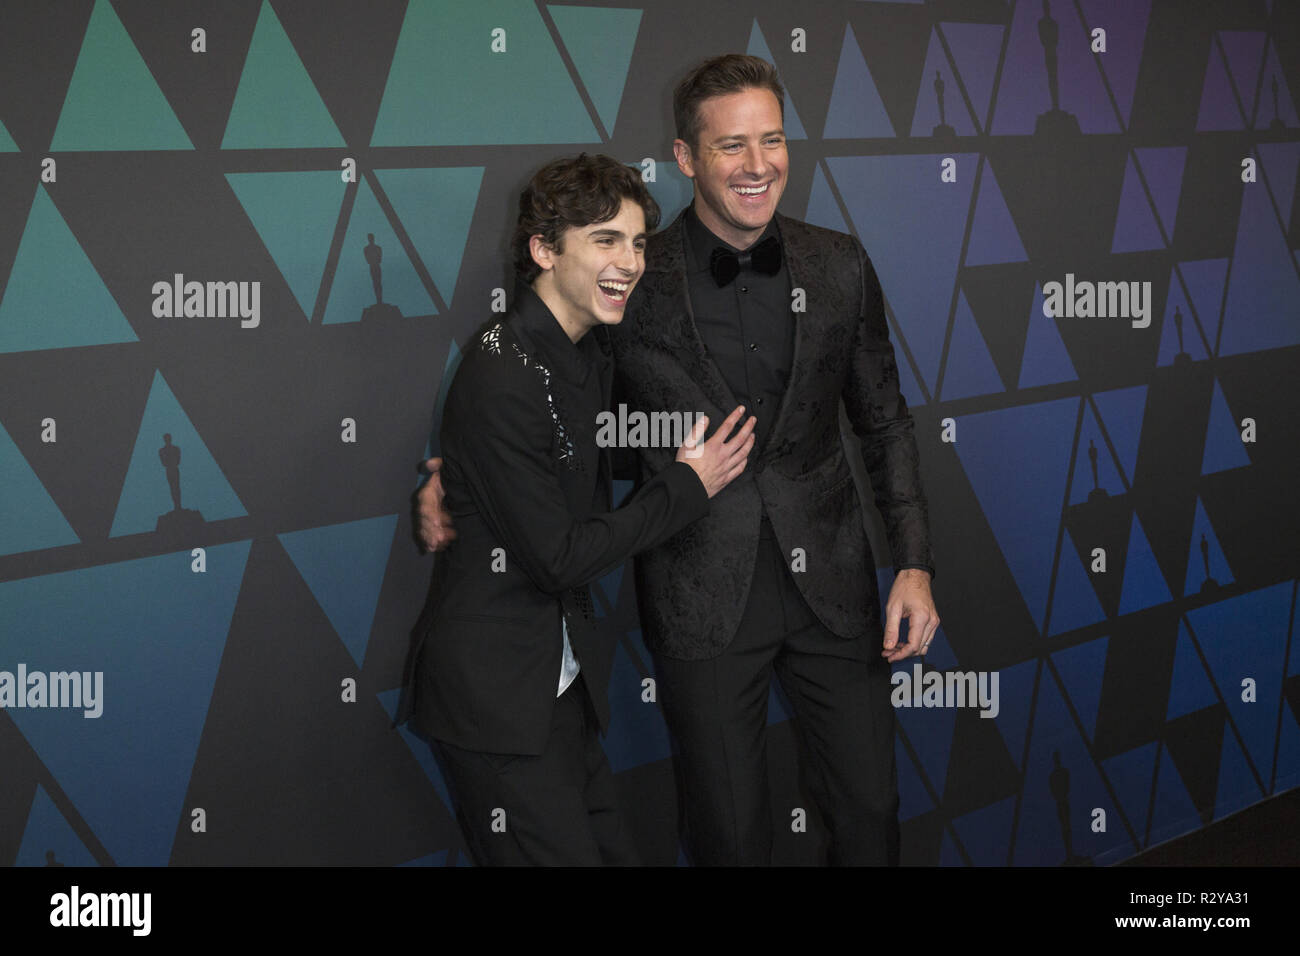 Timothe`e Chalamet and Armie Hammer attend the Academy’s 2018 Annual Governors Awards in The Ray Dolby Ballroom at Hollywood & Highland Center in Hollywood, CA, on Sunday, November 18, 2018. Stock Photo